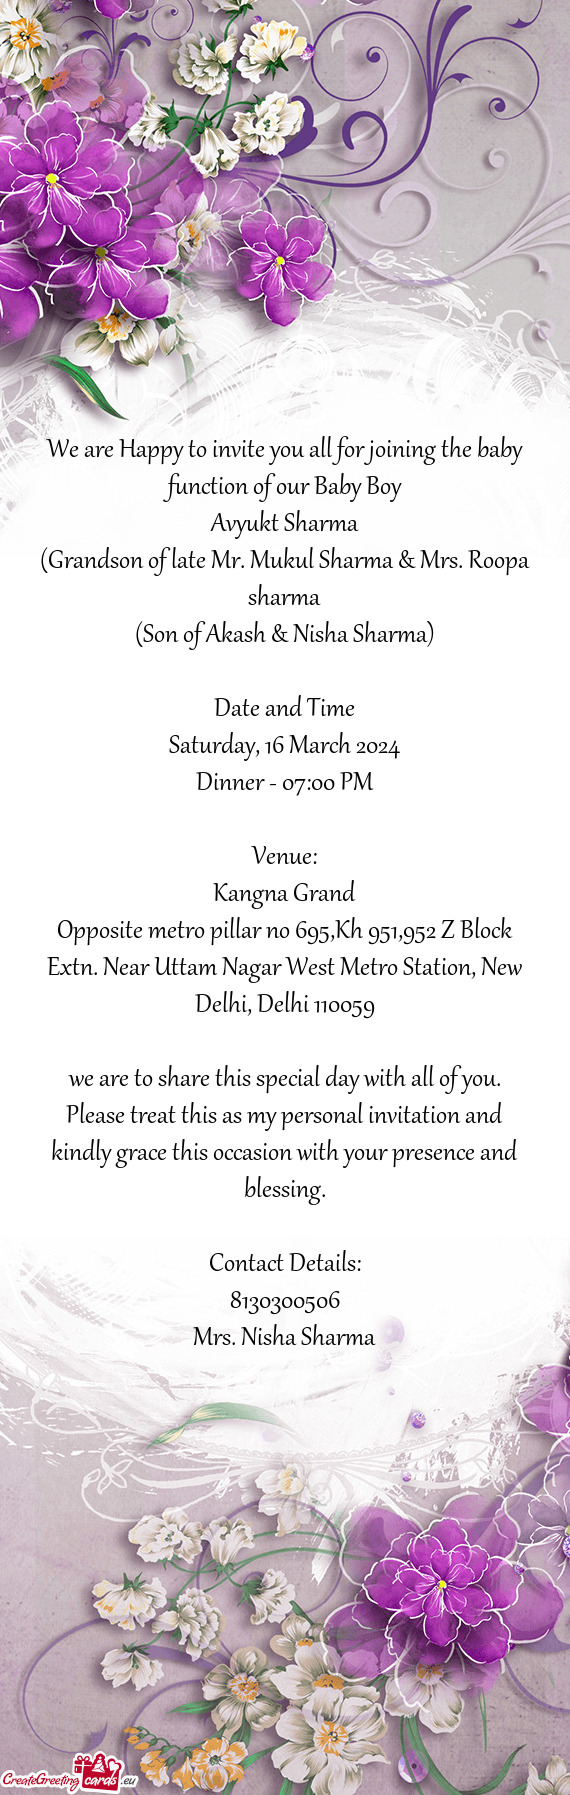 We are Happy to invite you all for joining the baby function of our Baby Boy